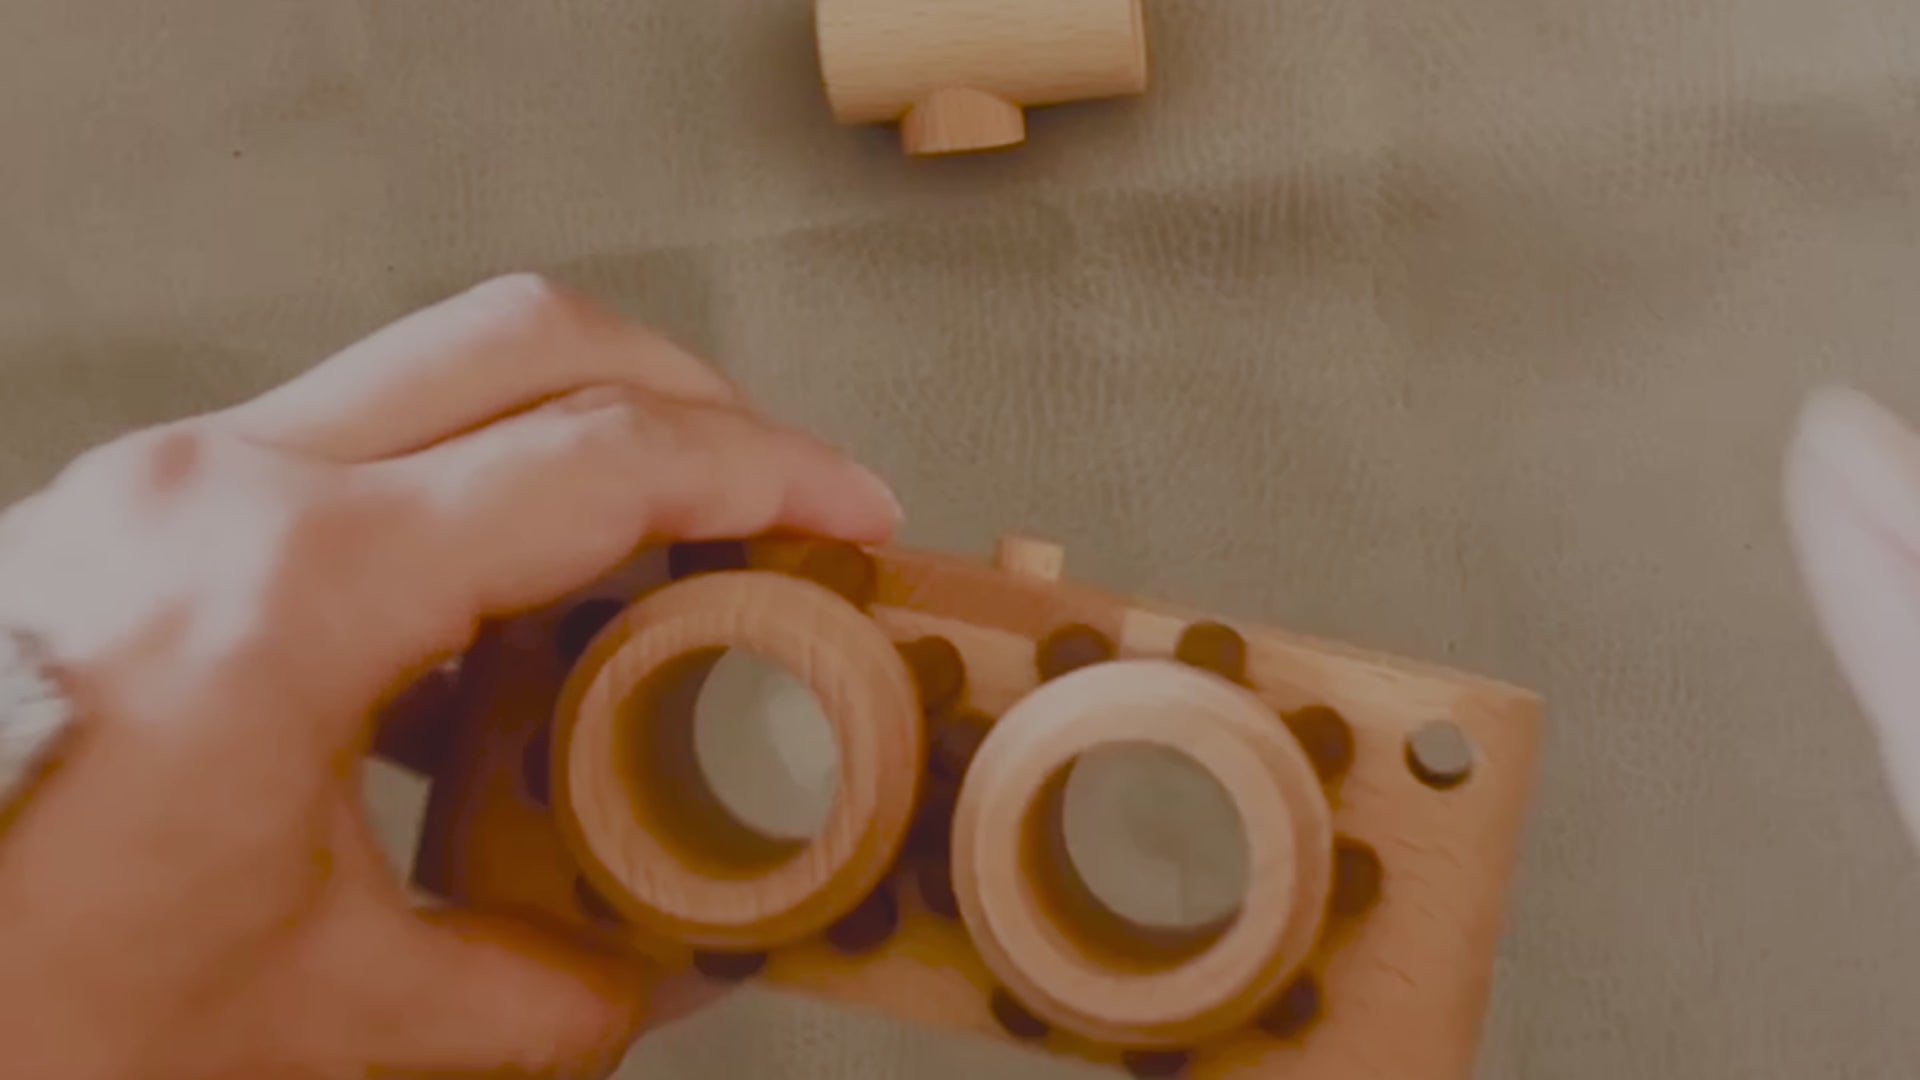 Load video: Explore our eco-friendly double lens wooden toy camera, crafted with precision to ignite imagination and creativity. This durable wooden camera inspires storytelling, fun, and the love of photography in children. Invest in this timeless and educational toy for skill development today!